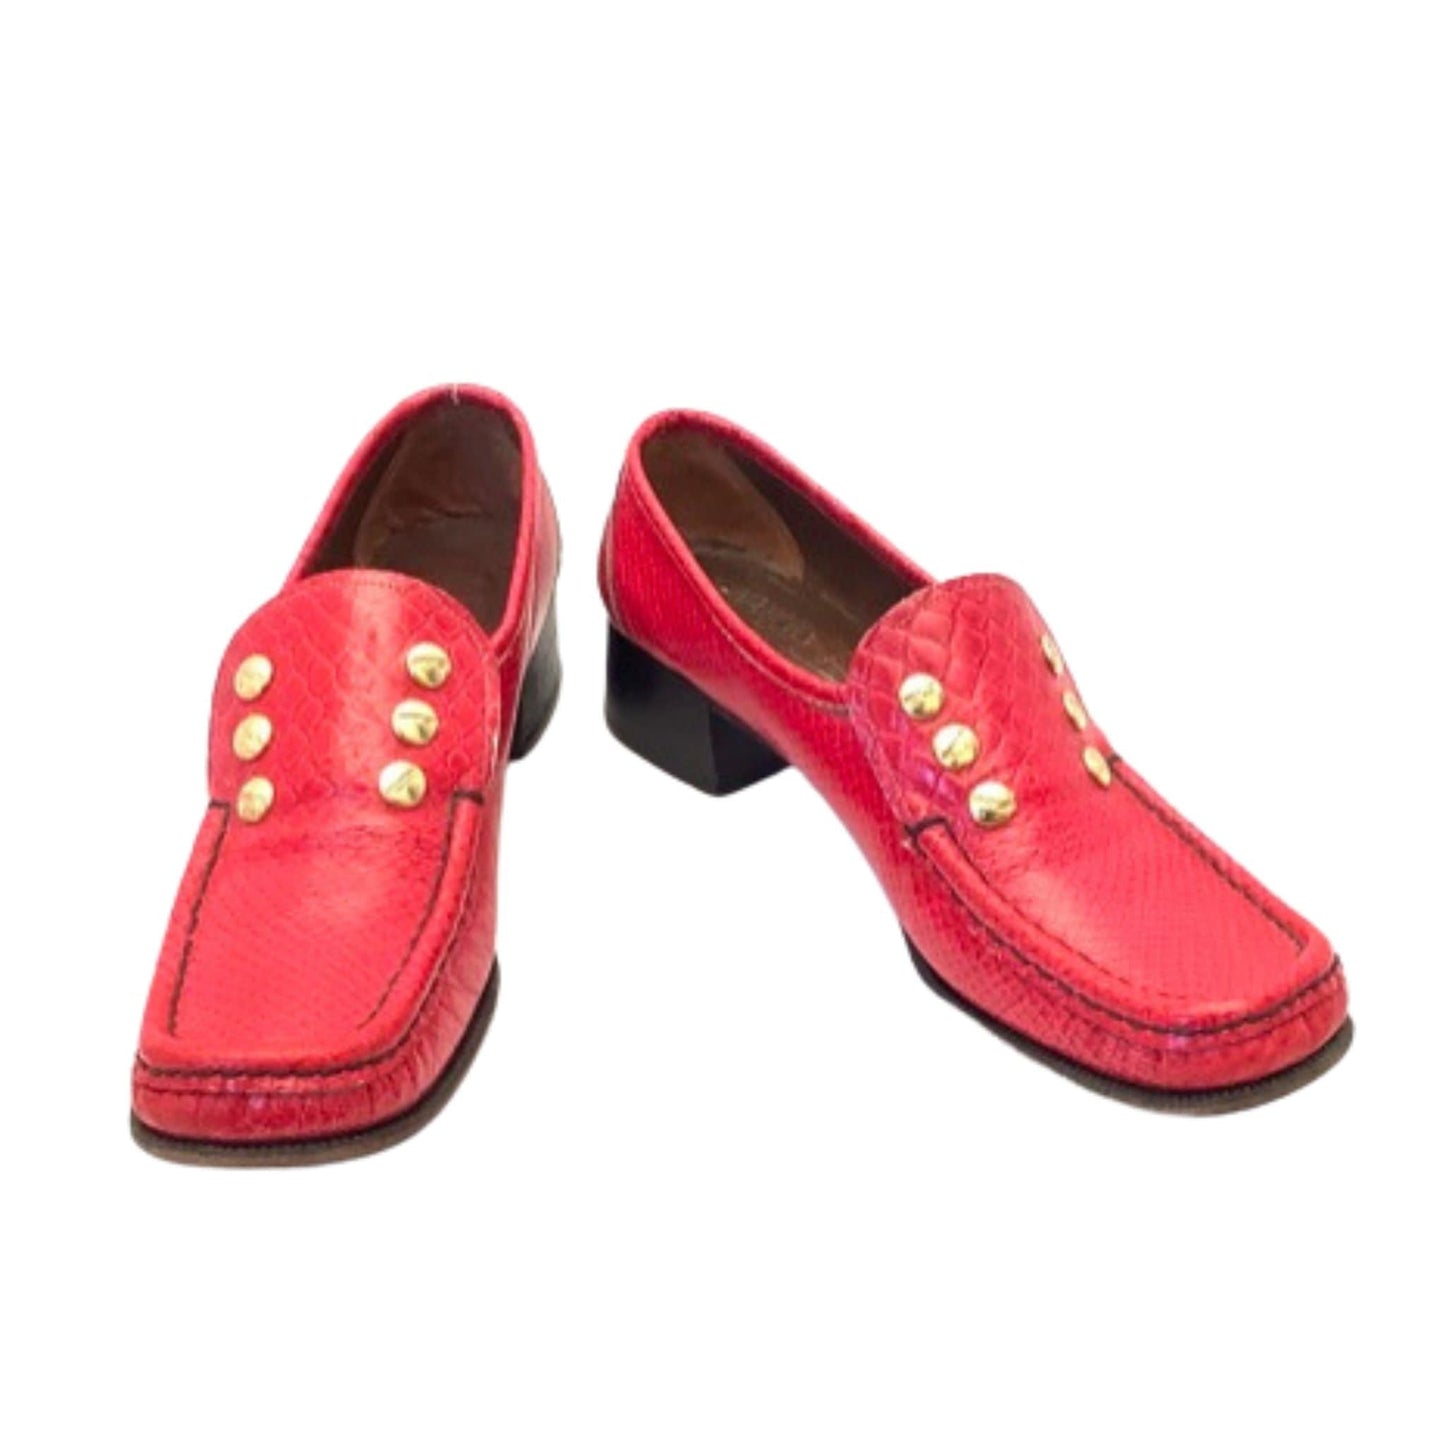 1960s Red Leather Loafers 7 / Red / Vintage 1960s